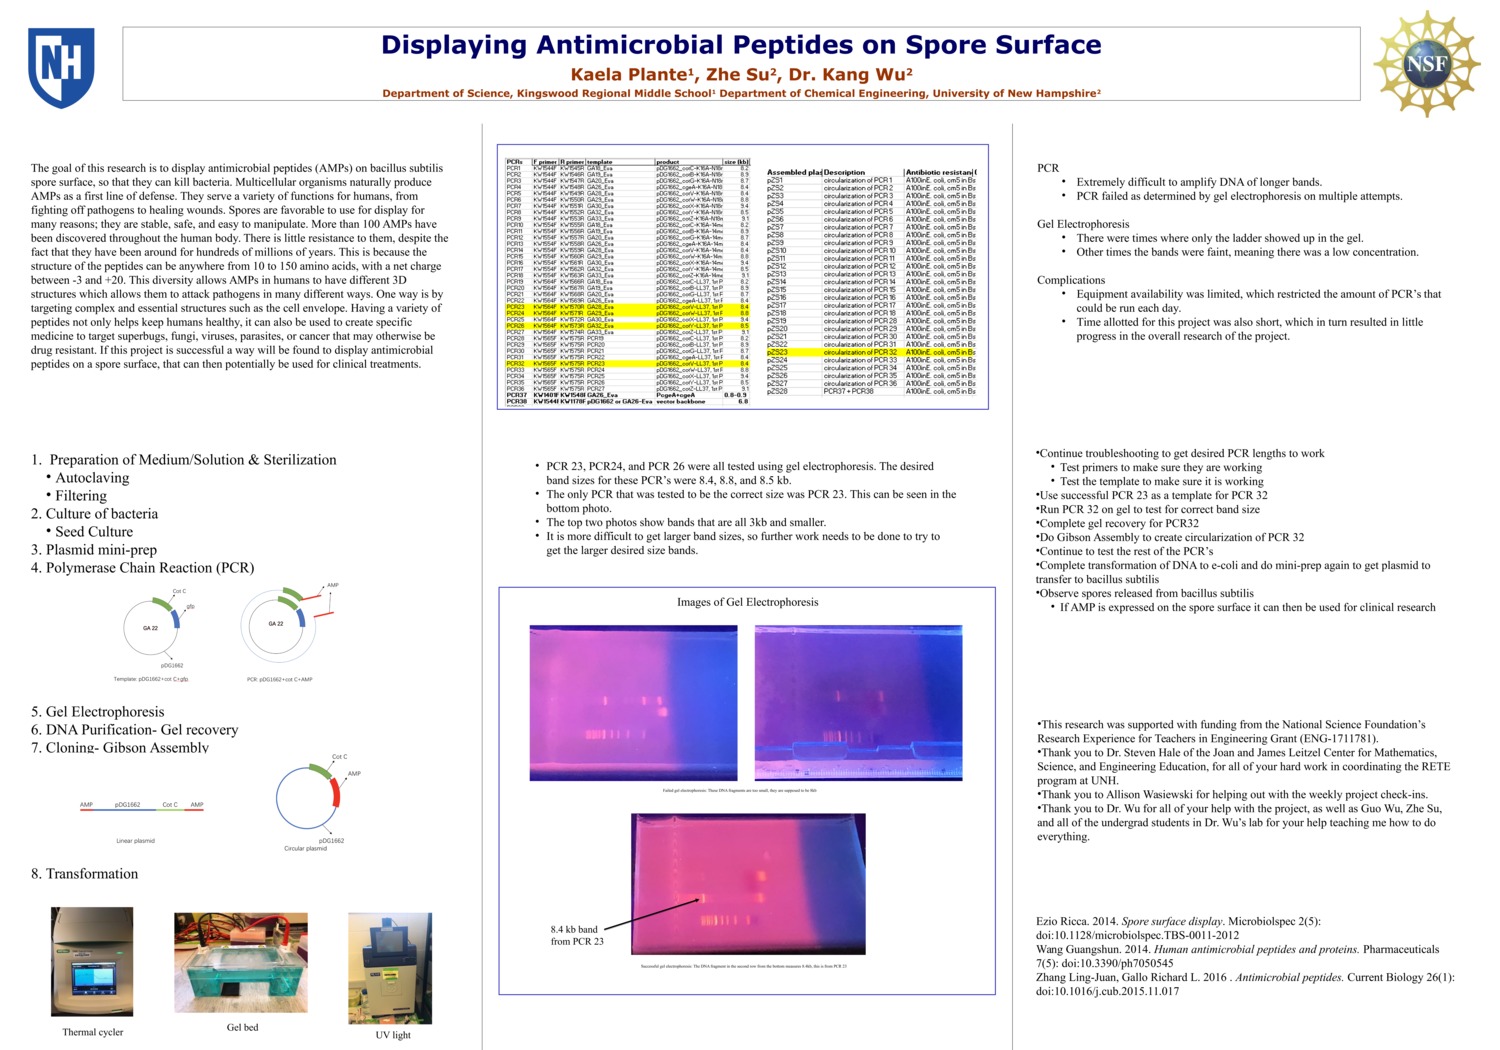 Displaying Antimicrobial Peptides On Spore Surface by kplante13